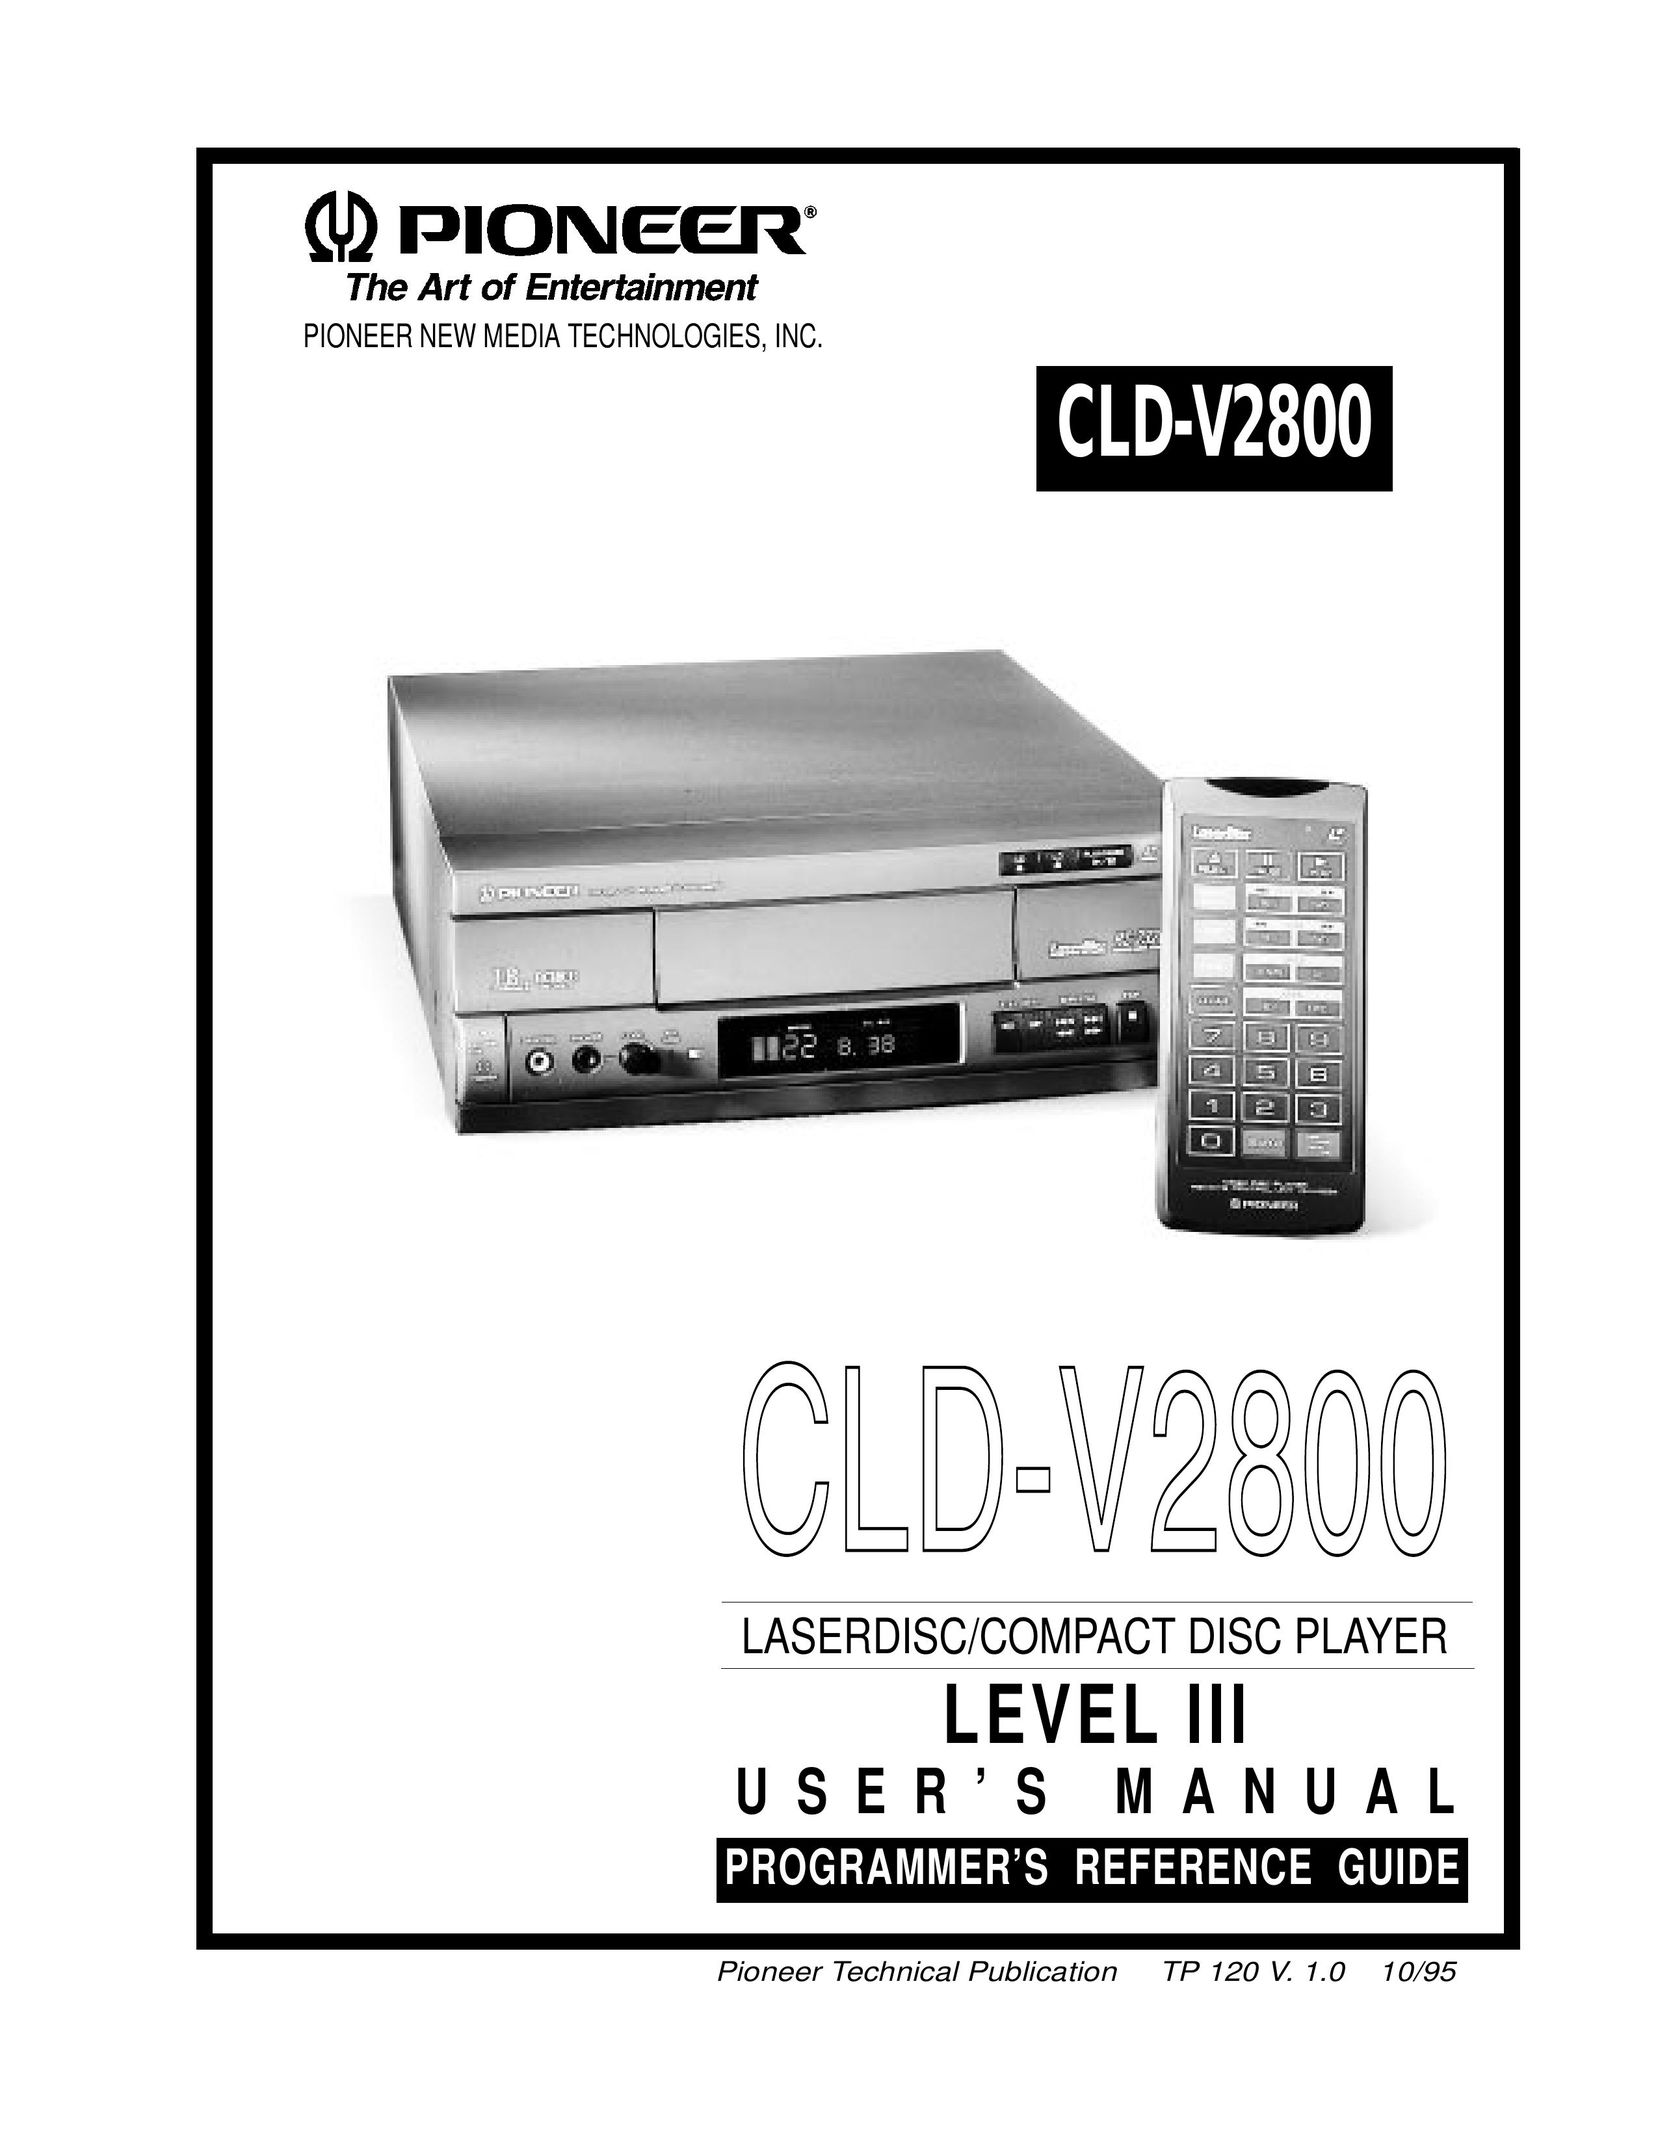 Pioneer CLD-V2800 CD Player User Manual